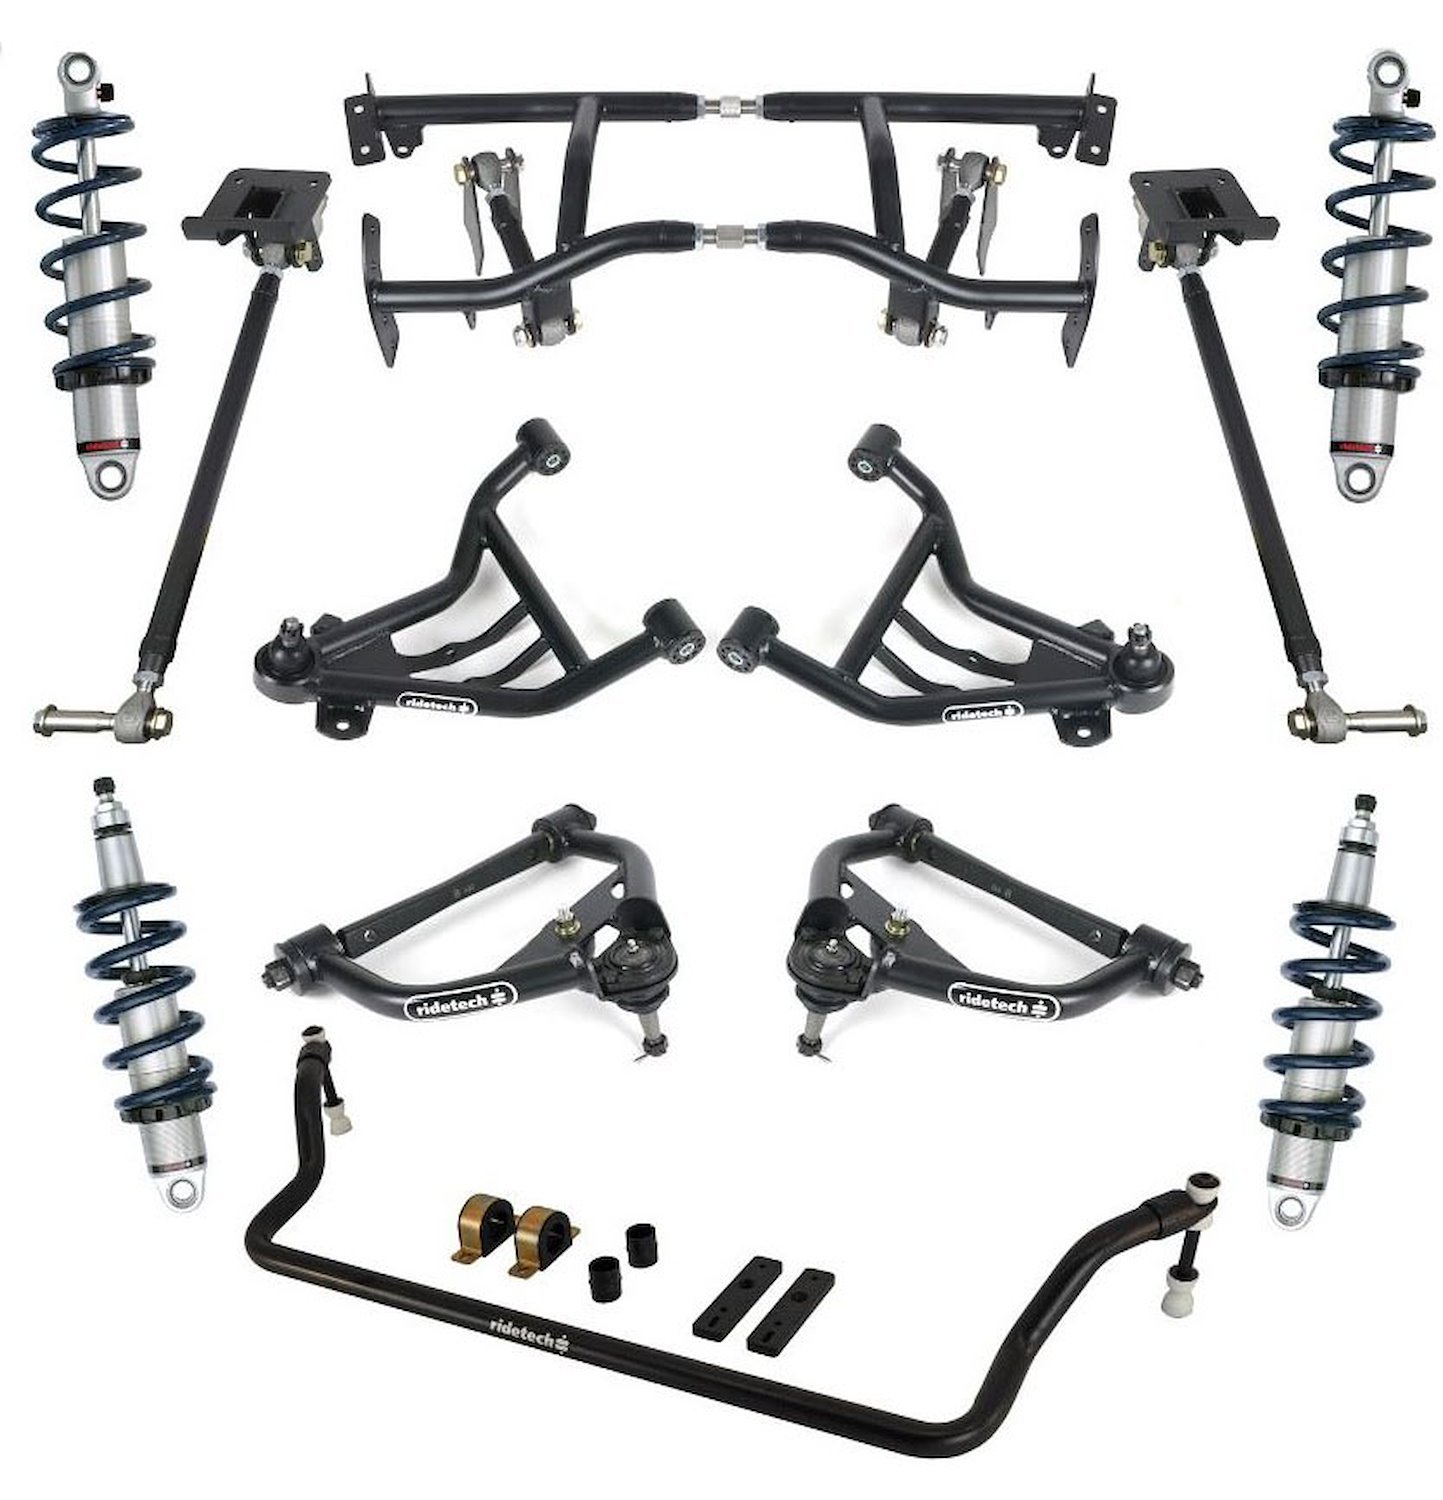 Complete Coil-Over Suspension System w/HQ Series Coil-Overs for 1970-1981 Chevy Camaro, Pontiac Firebird